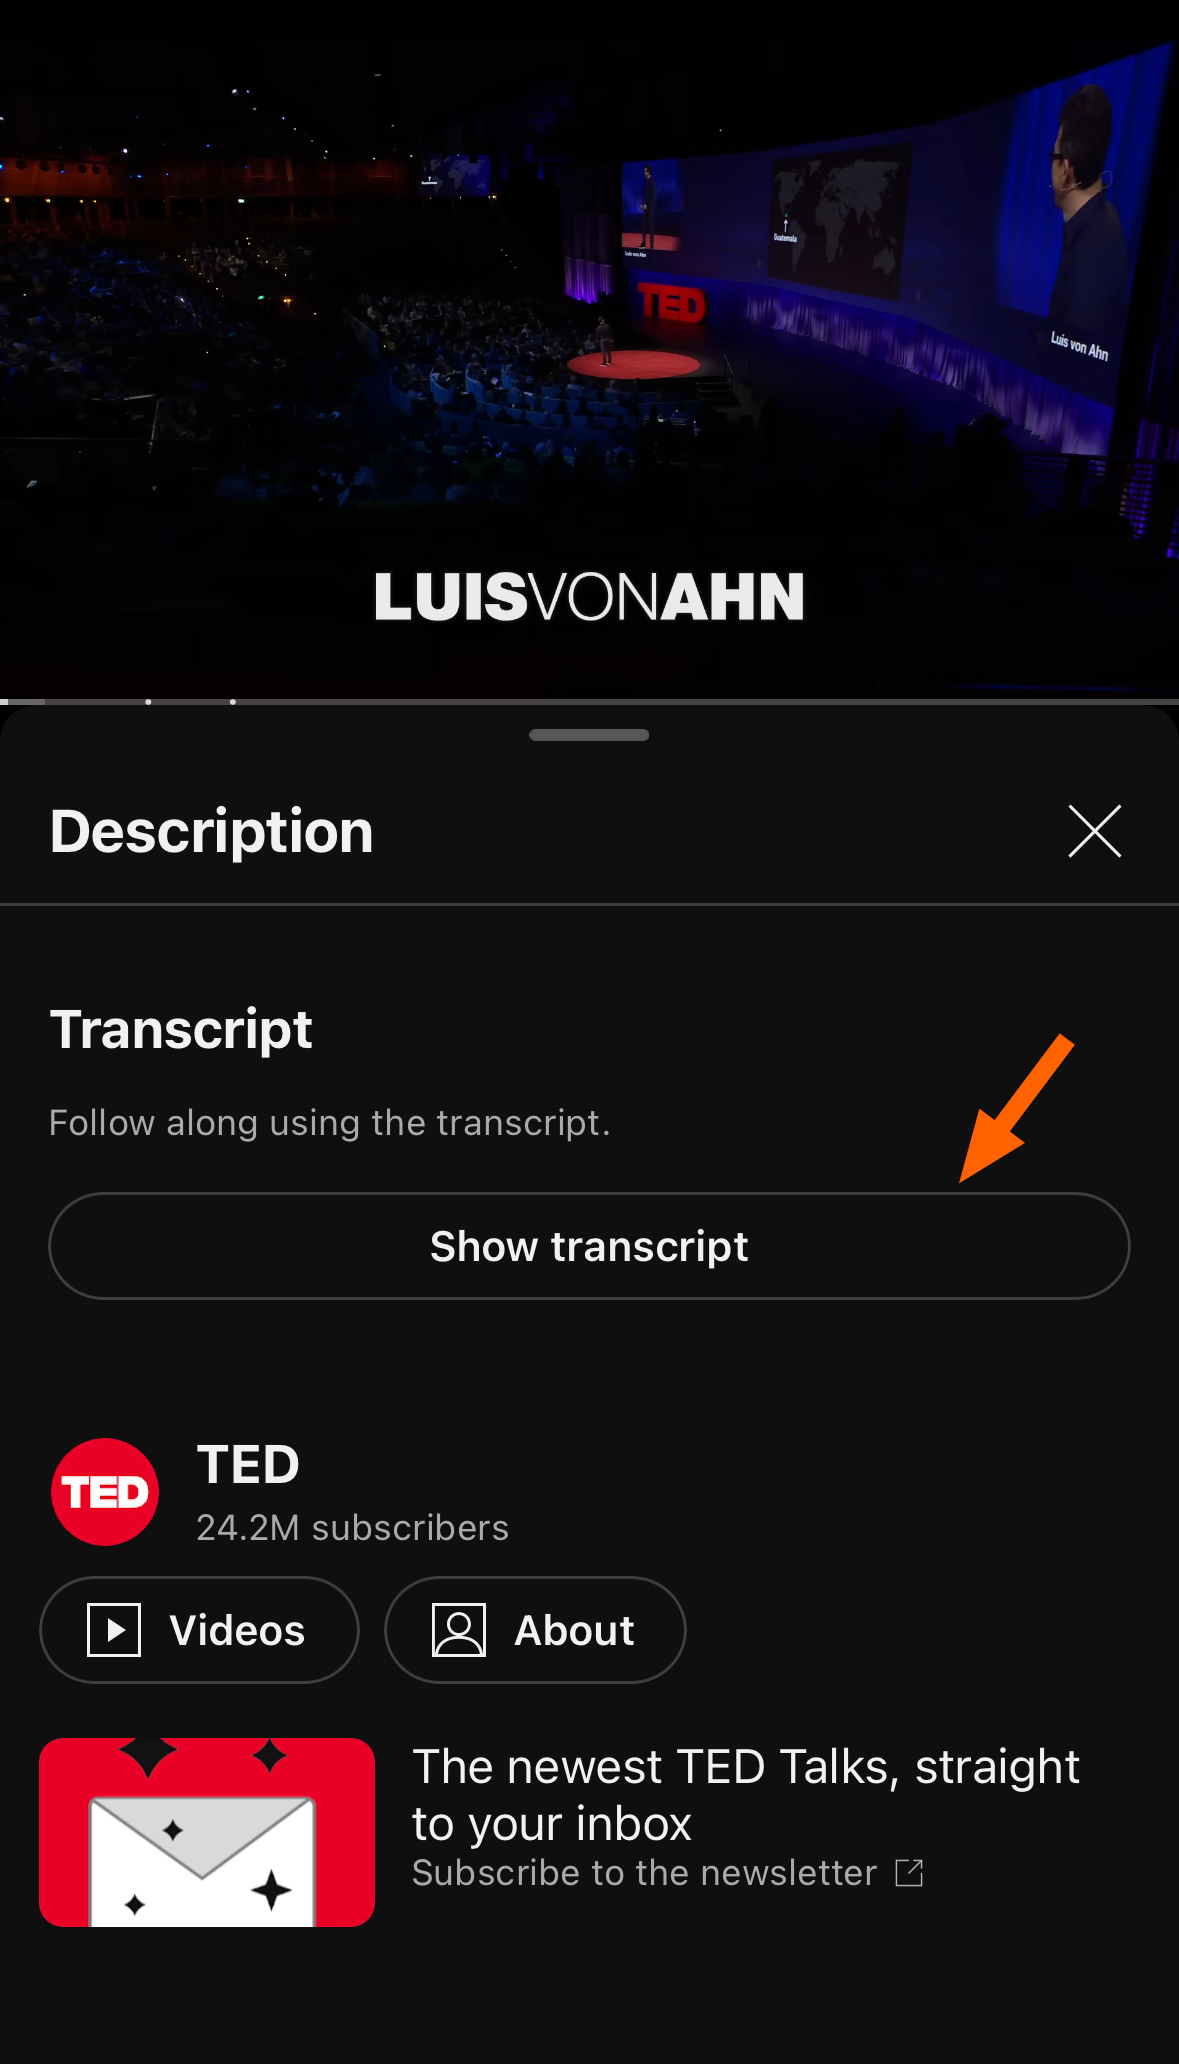 Screenshot of the "show transcript" button on mobile with an orange arrow pointing to it